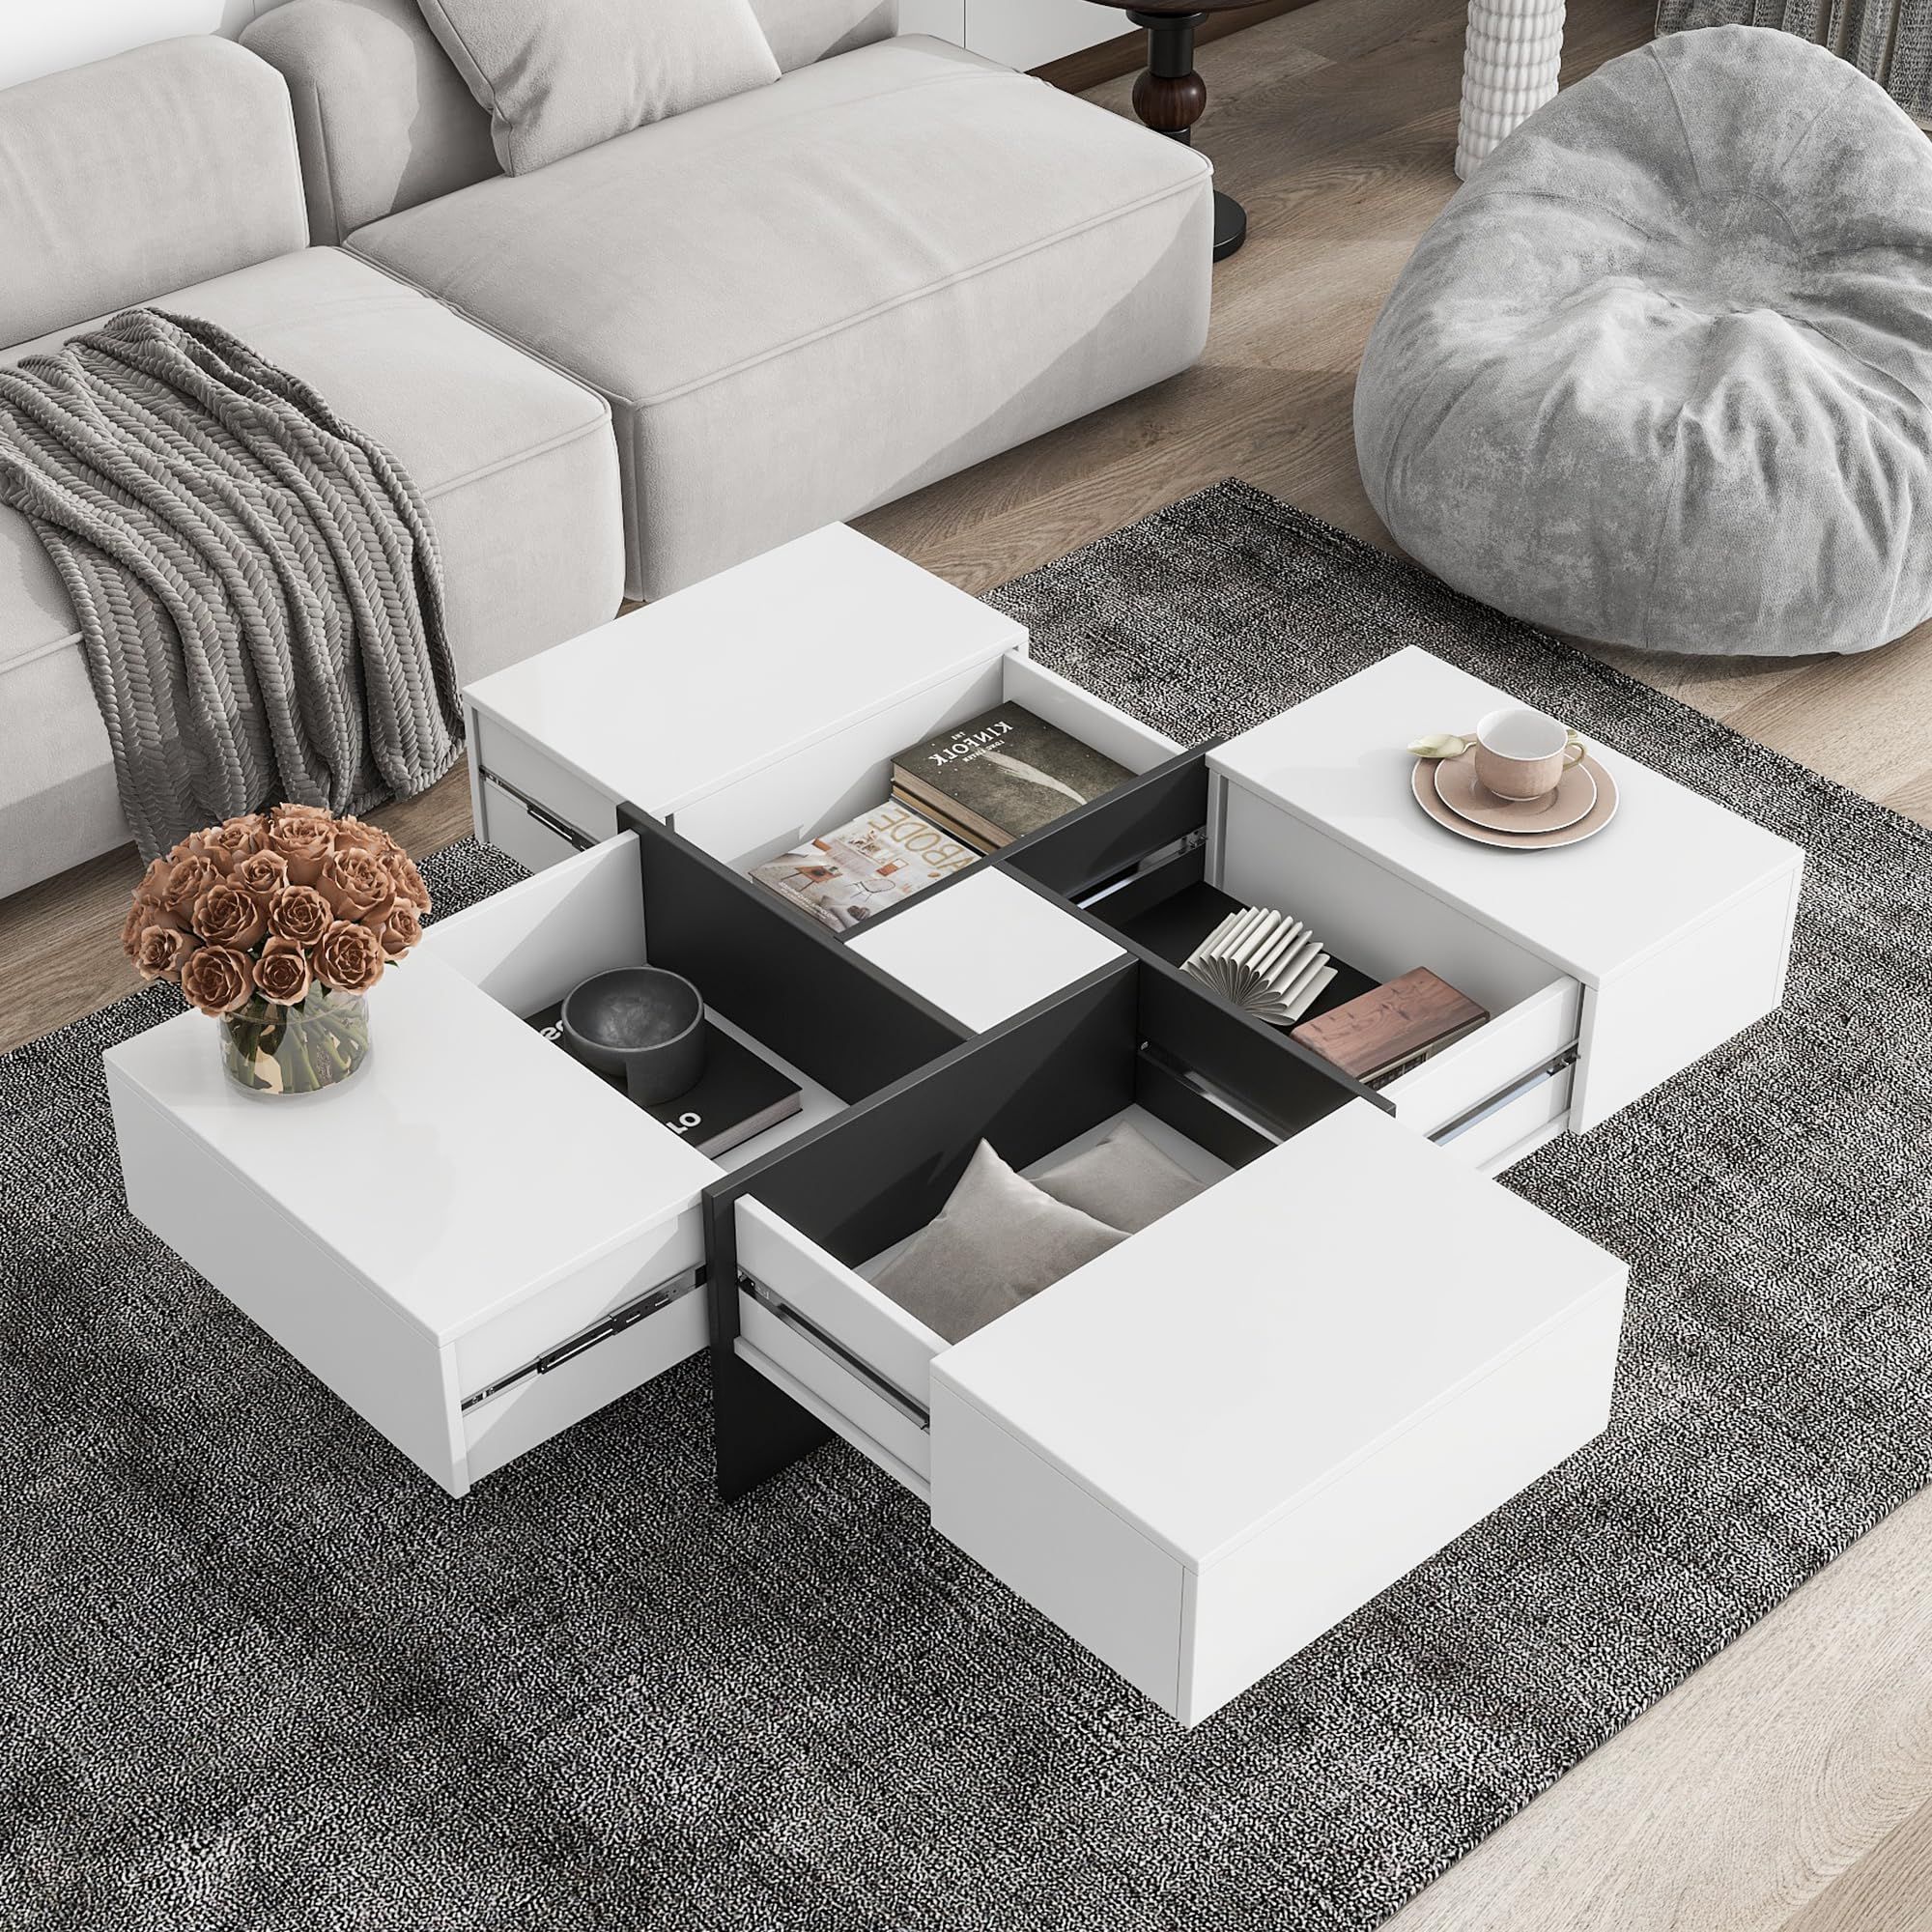 Amazon: Merax Modern Square Coffee Table With 4 Hidden Storage  Compartments, Uv High Gloss Design For Living Room, White : Home & Kitchen In Most Recently Released Modern Coffee Tables With Hidden Storage Compartments (View 2 of 10)